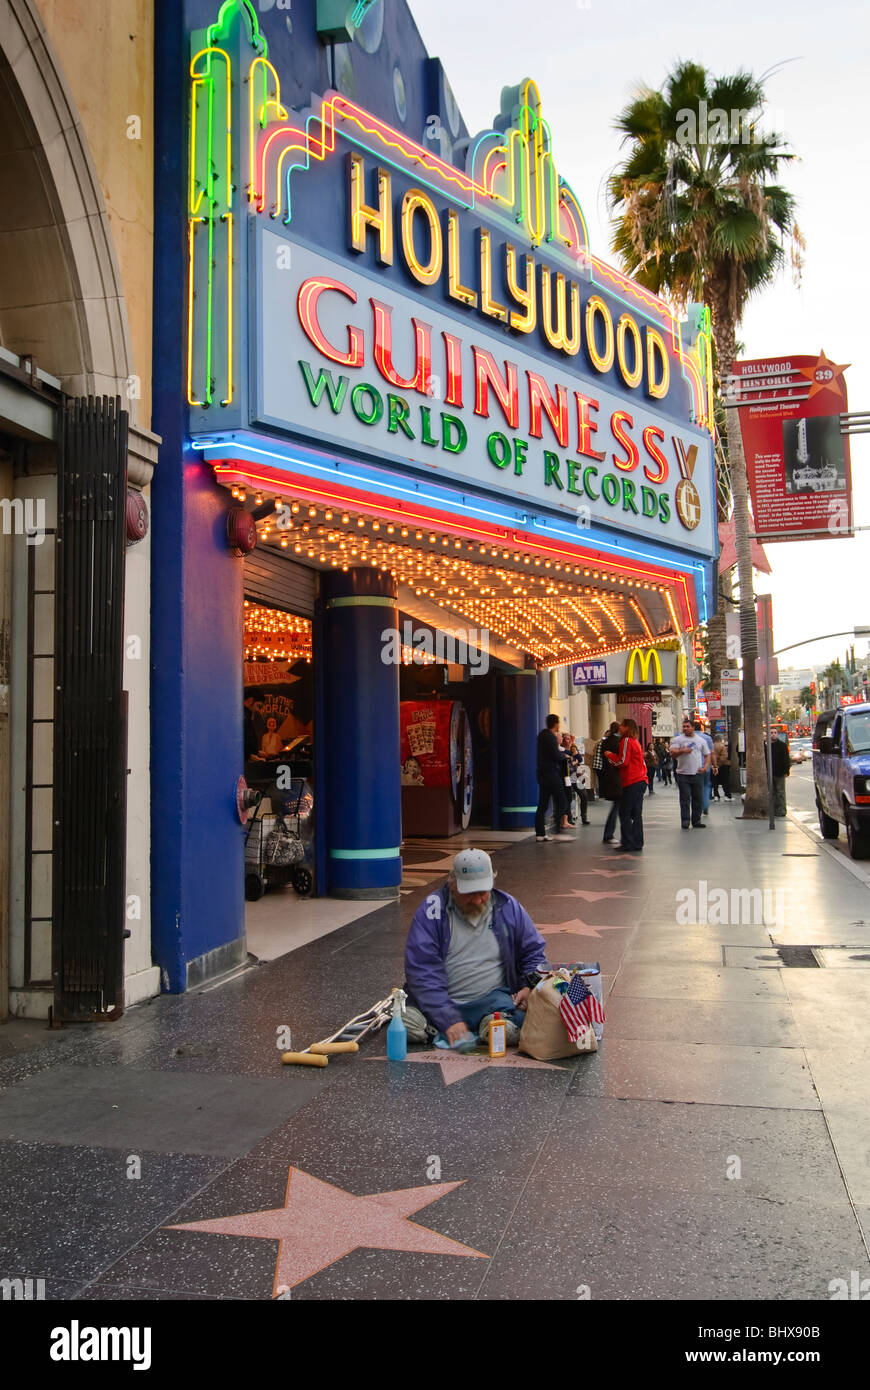 The Hollywood Guinness Museum of World Records on the Walk of Fame on Hollywood Blvd with someone polishing the stars. Stock Photo